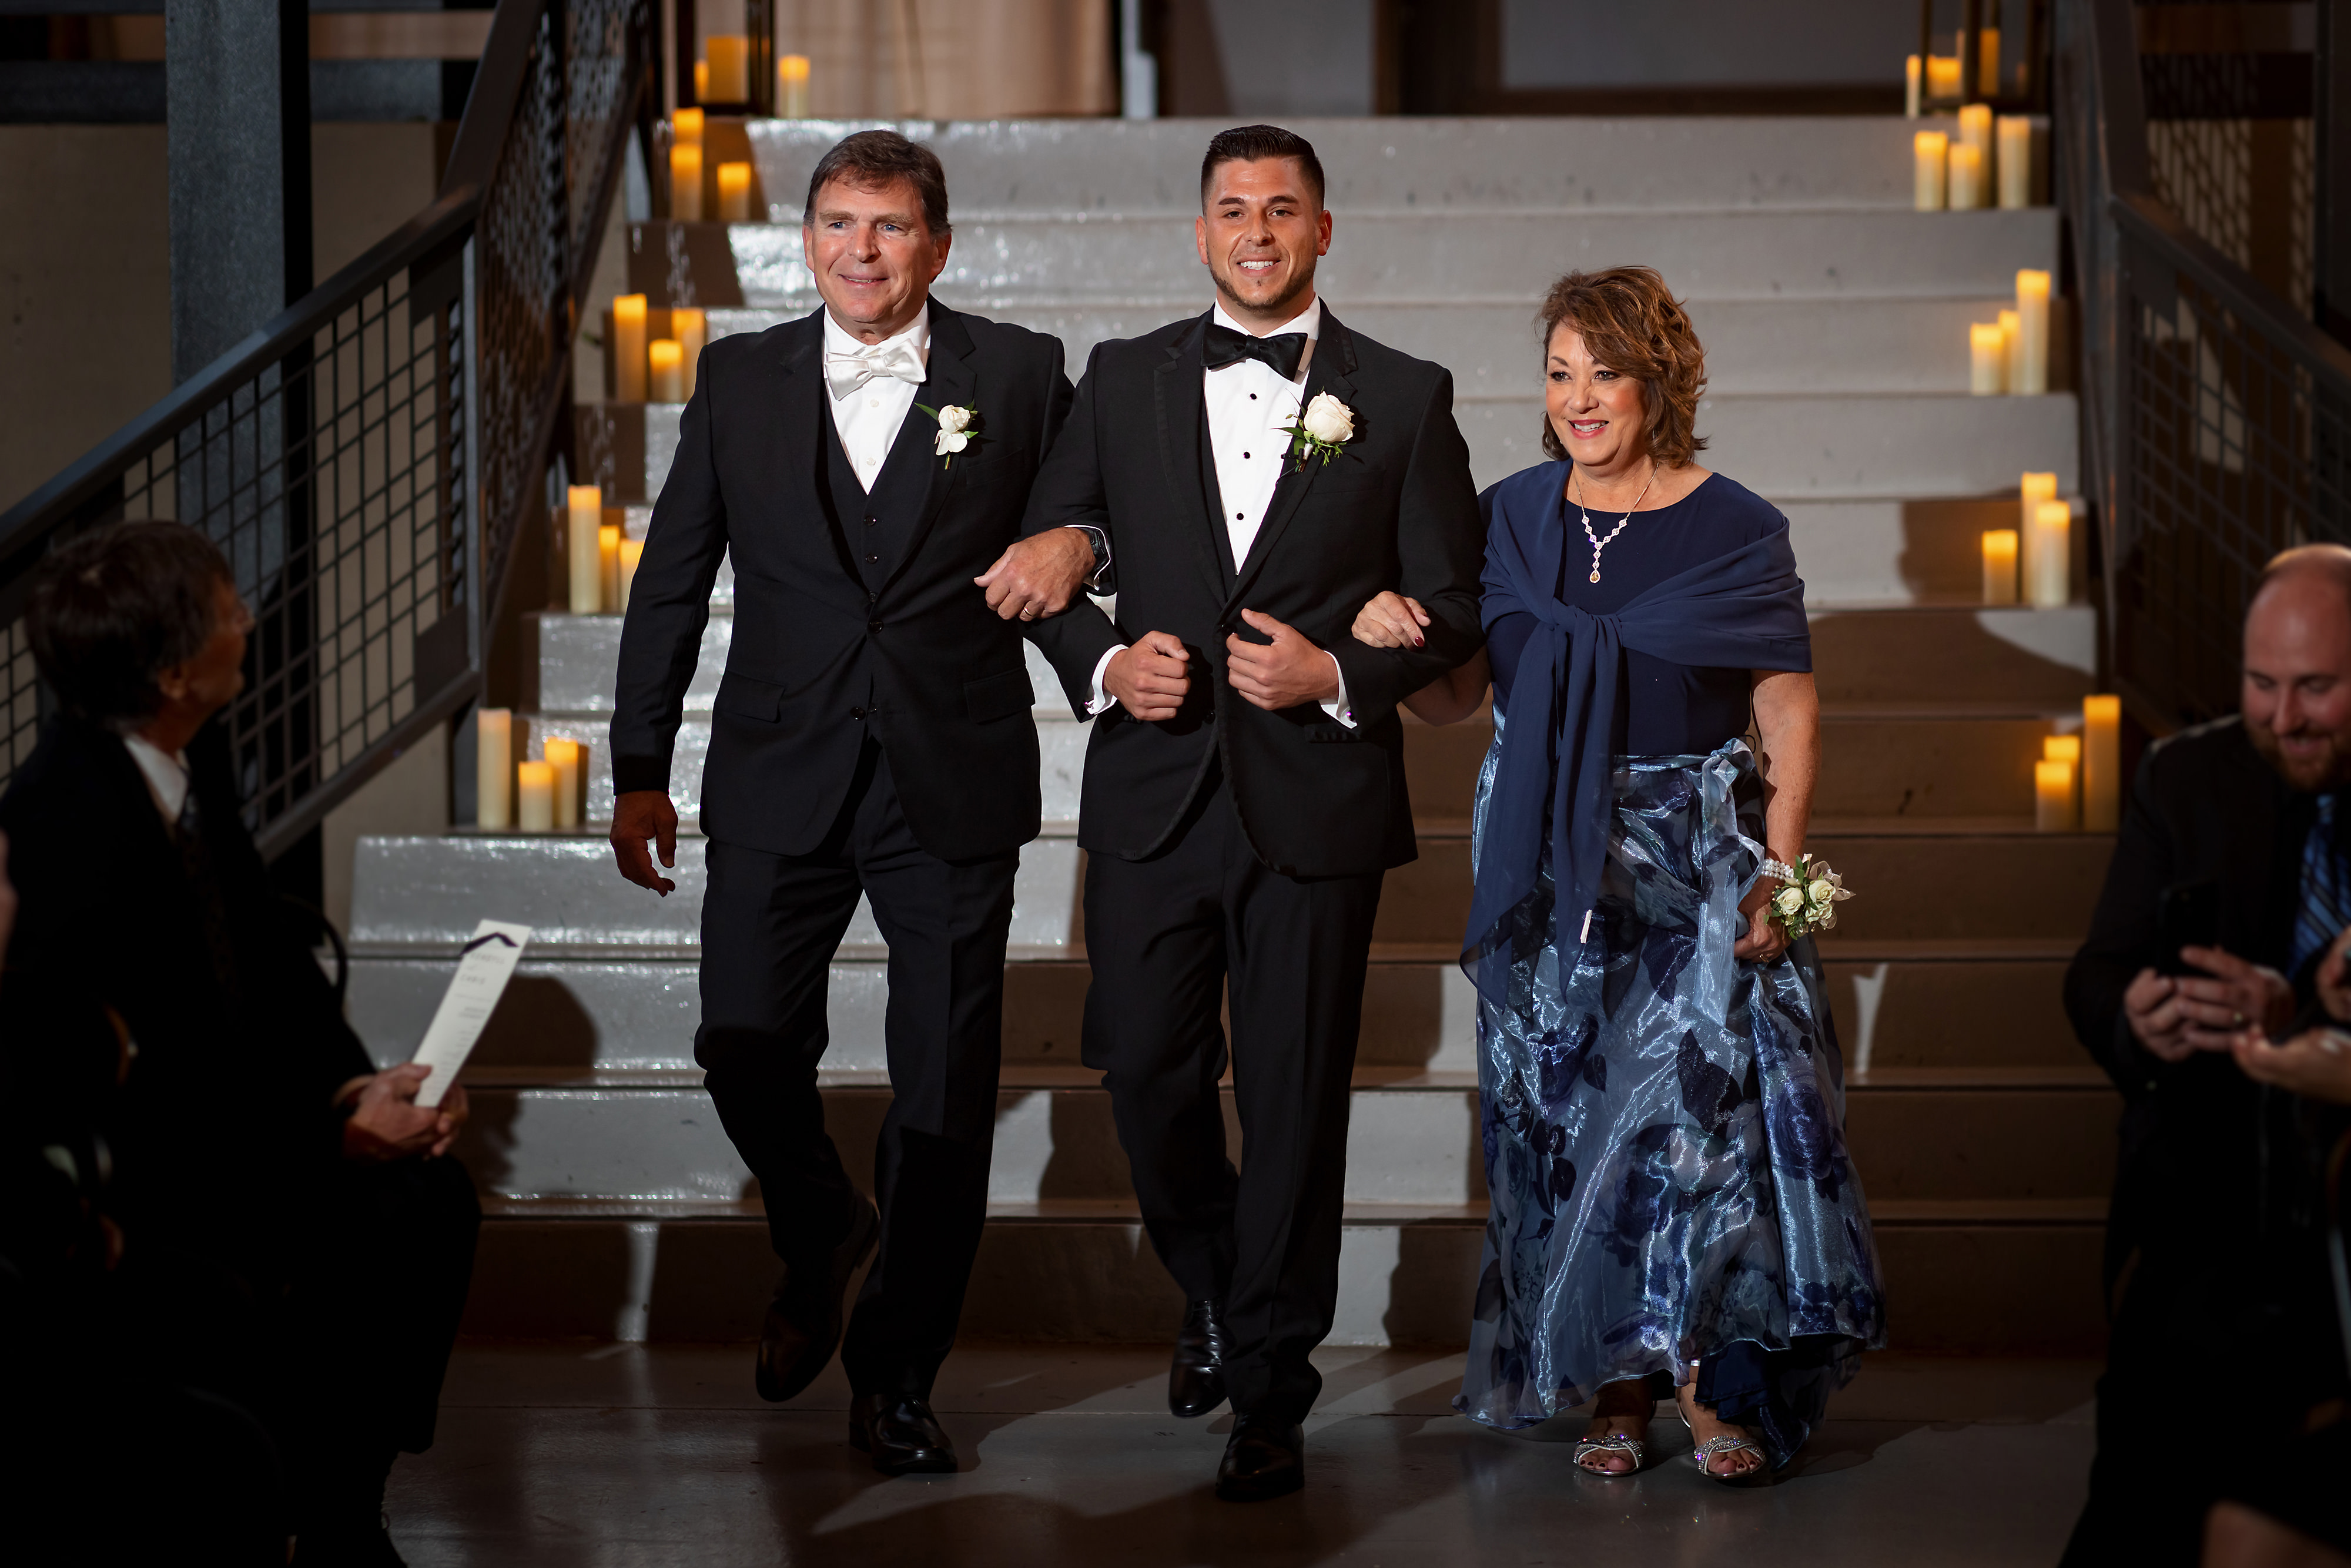 Groom walks down the aisle with parents during wedding ceremony at Artifact Events in Chicago's Ravenswood neighborhood.